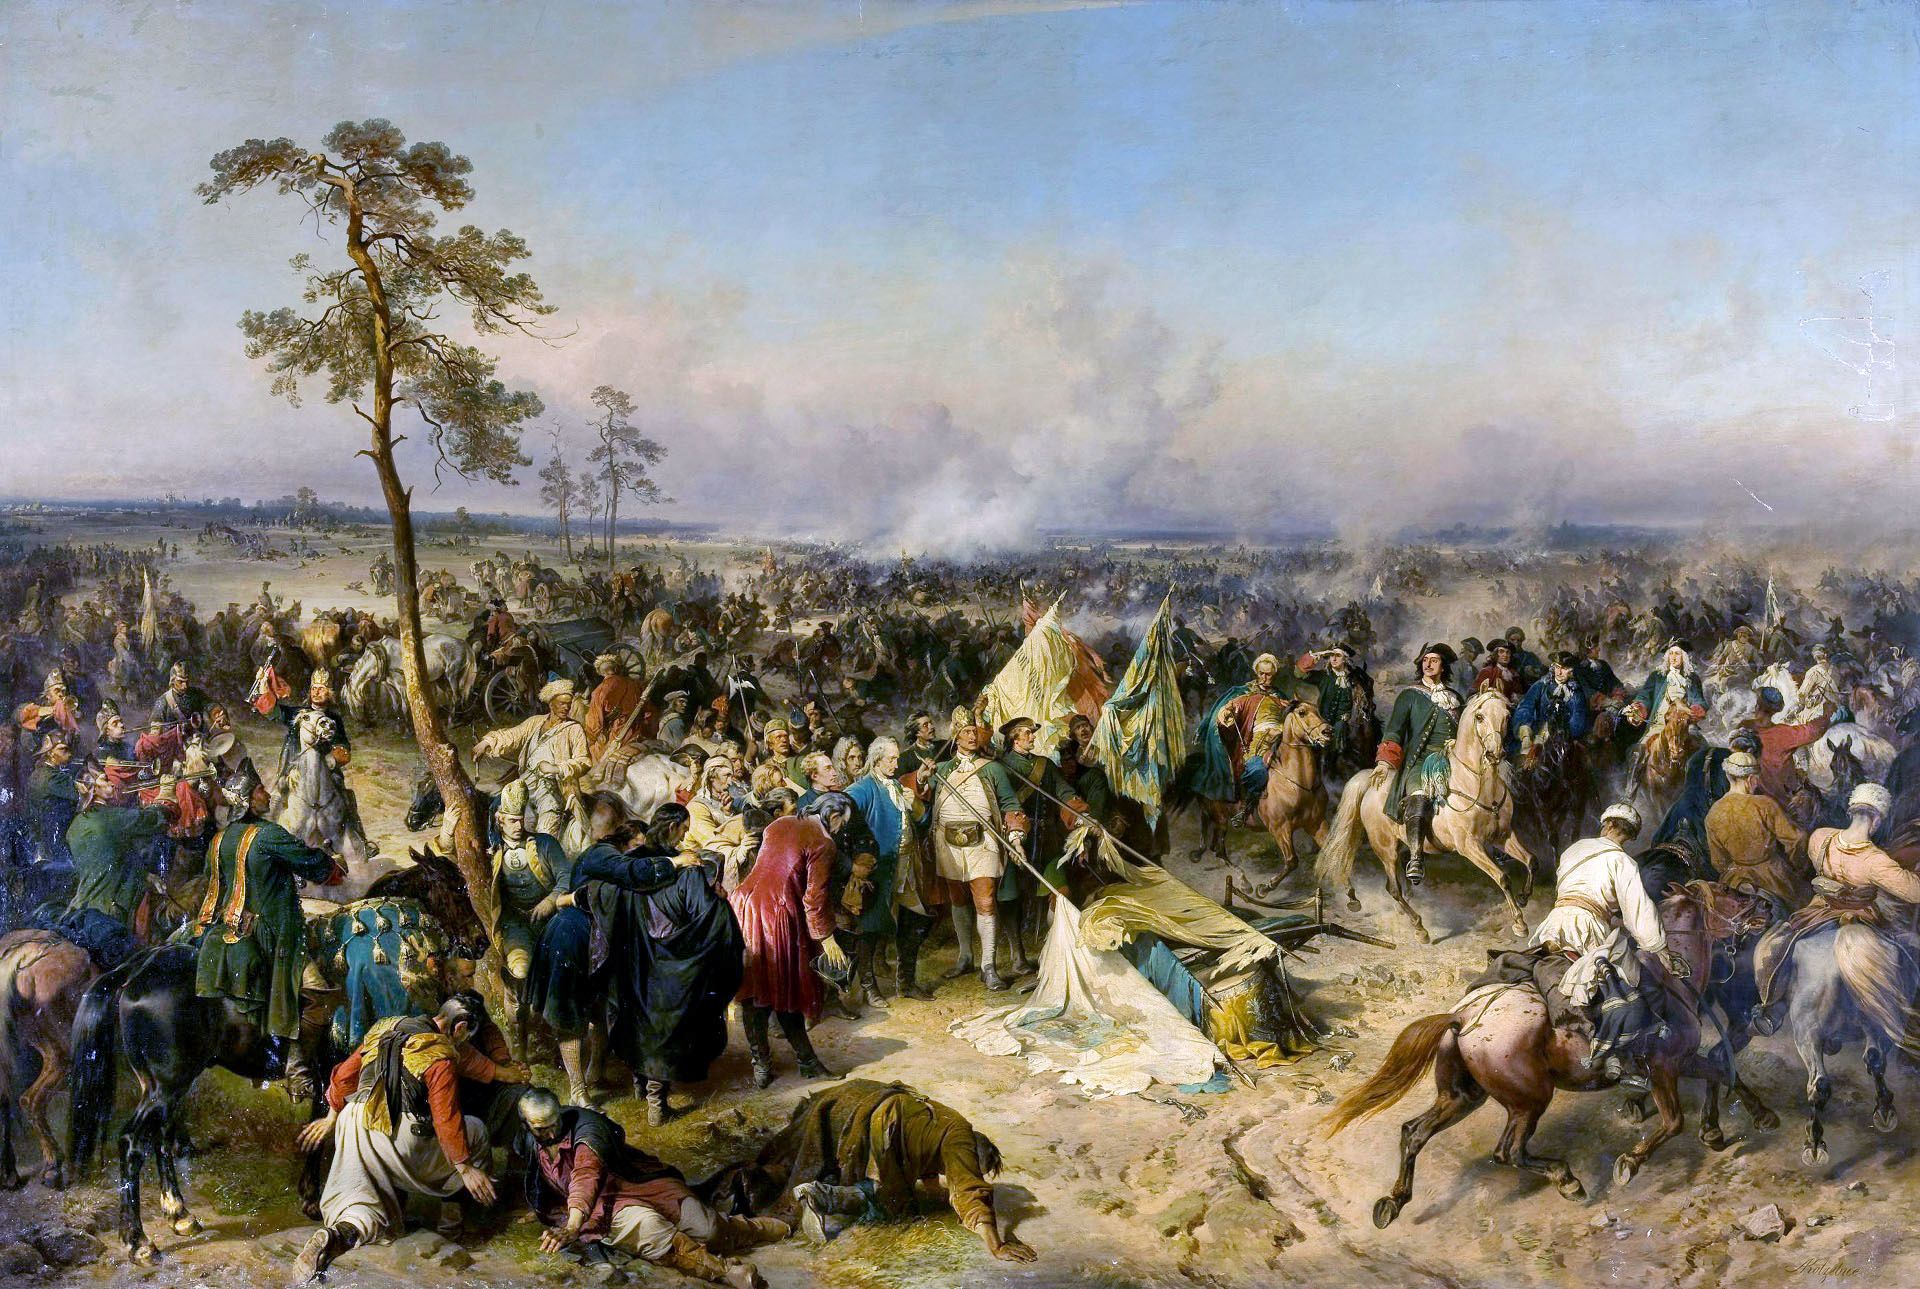 A victorious Tsar Peter I after the Battle of Poltva, a watershed moment in Russian and European history.